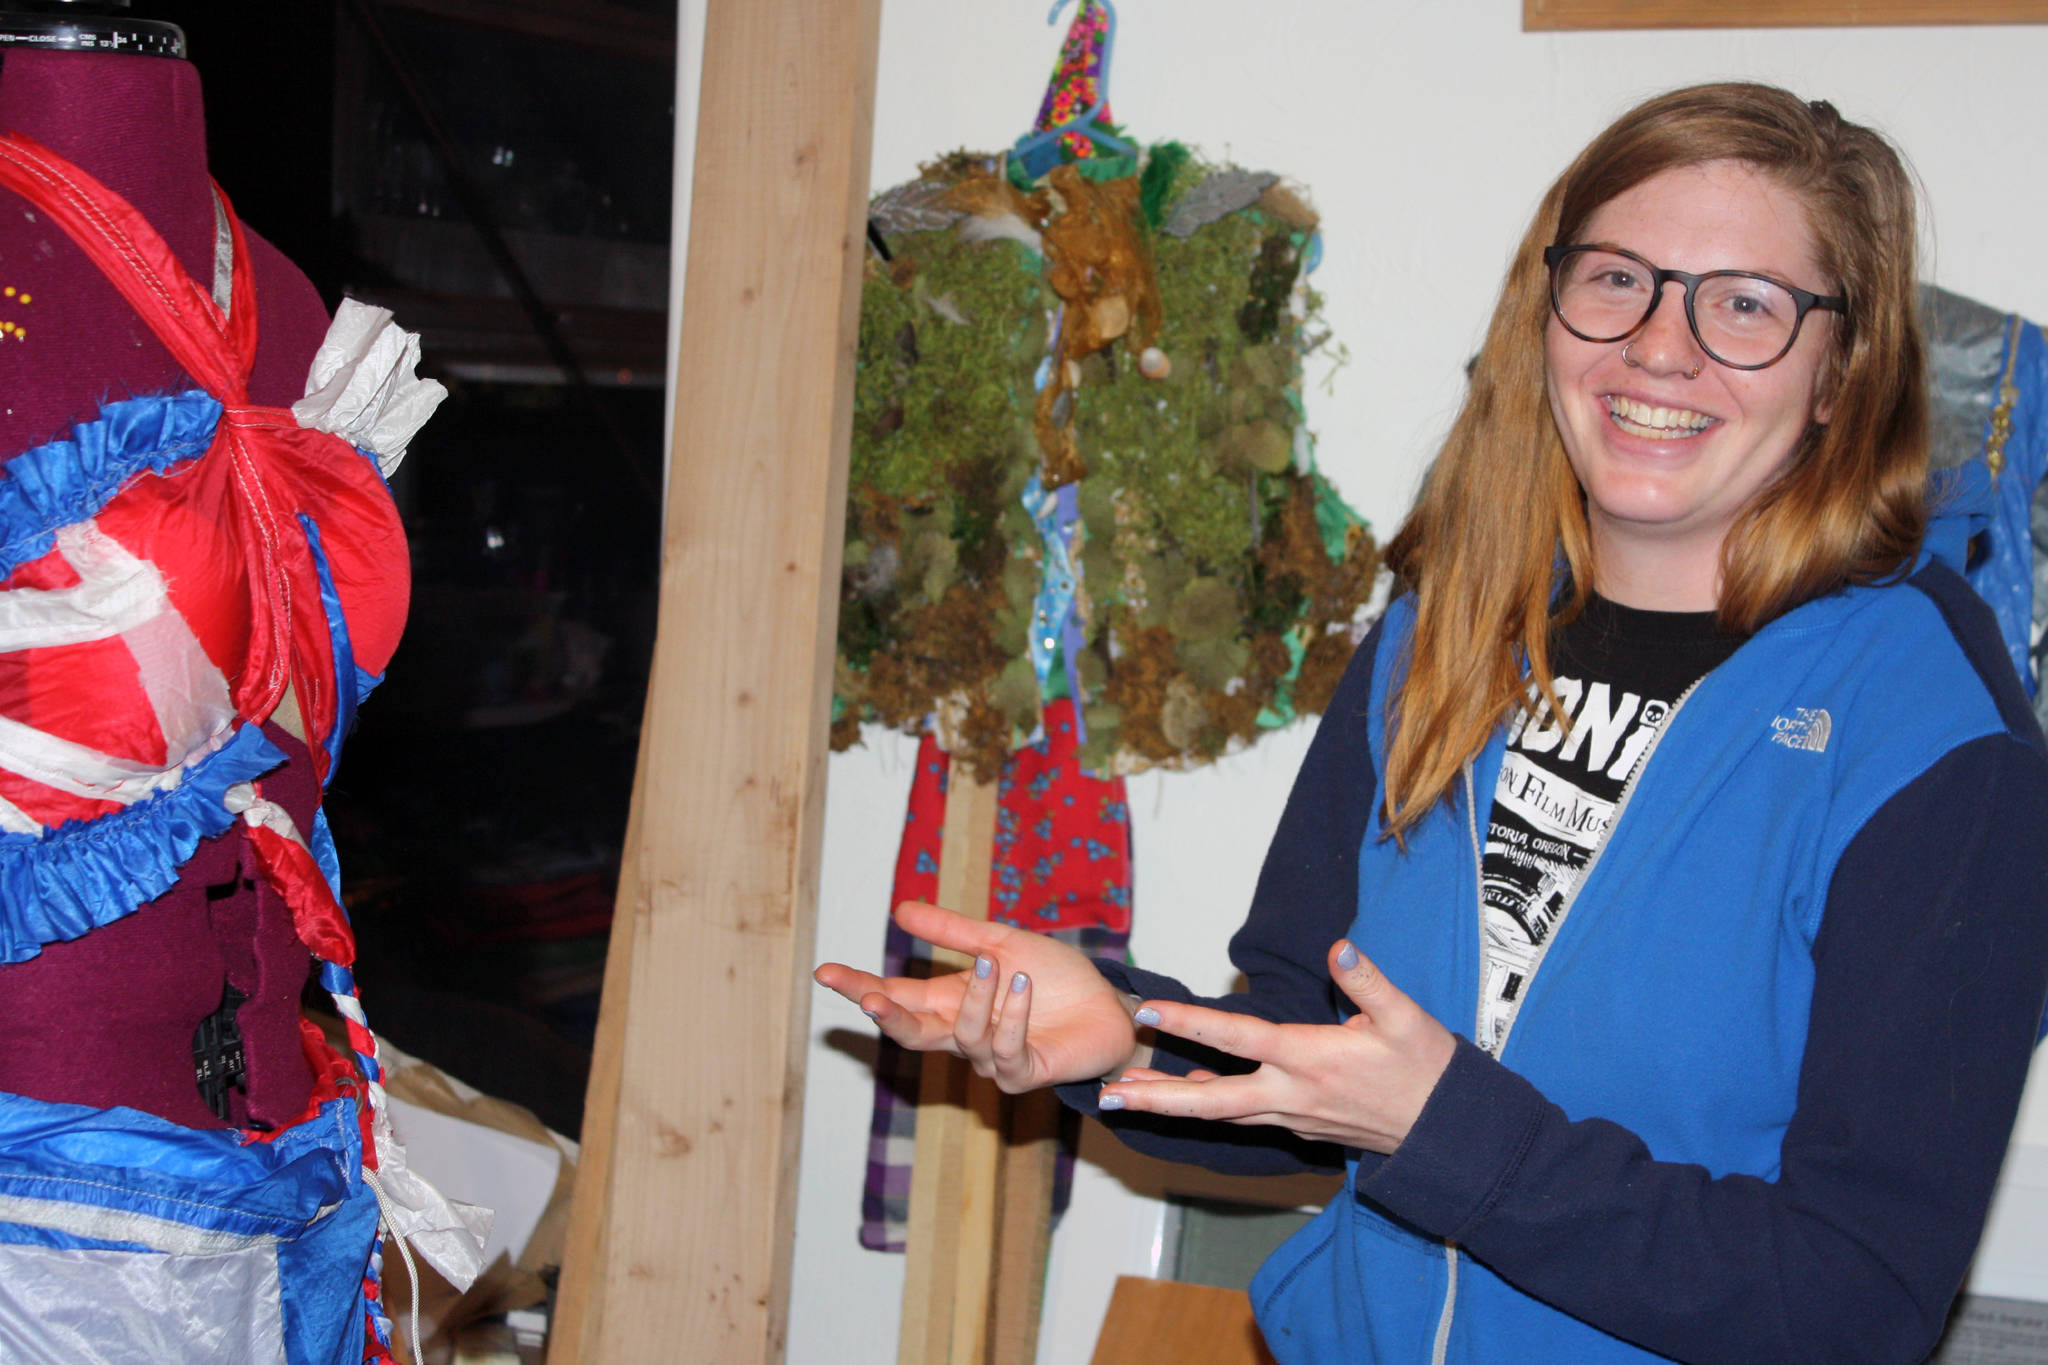 Ben Hohenstatt | Capital City Weekly                                Keren GoldbergBelle gestures at her Wearable Art 2020: Joie de Vivre piece. “The theme is sort of Abba meets Chiquita Banana,” GoldbergBelle said. “That’s what this is.” Past Wearable Art pieces can be seen in the background.